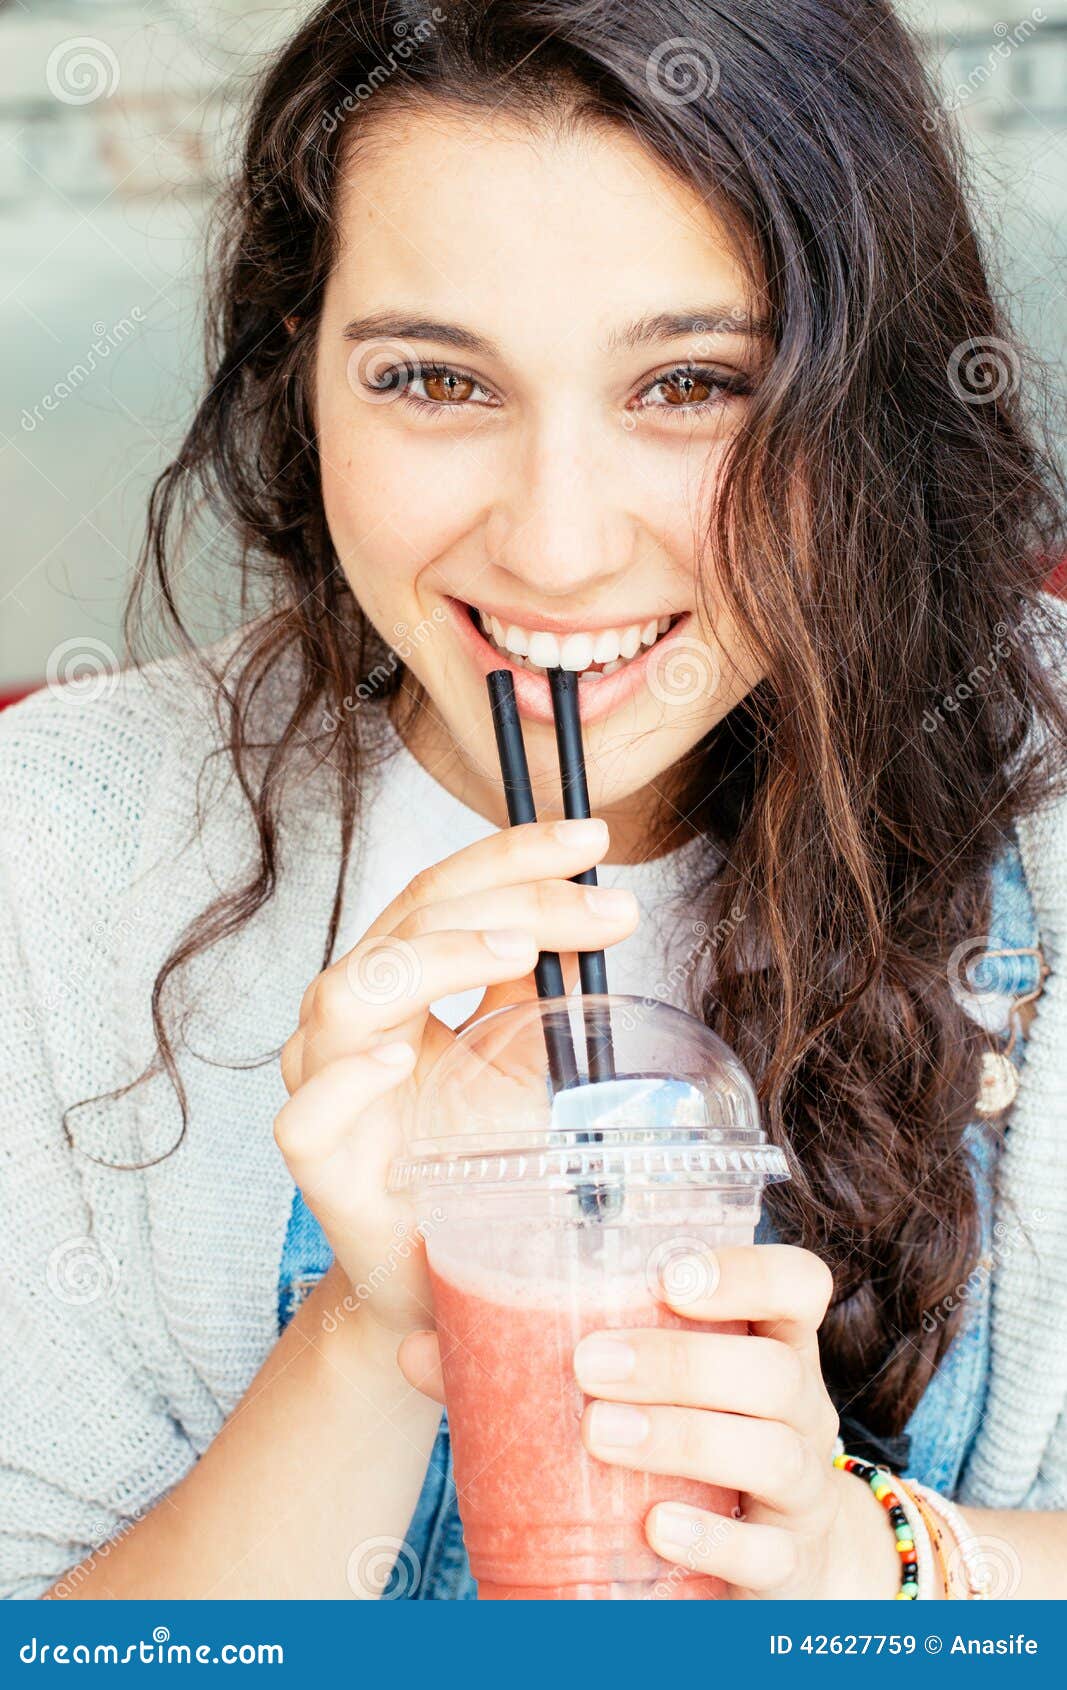 Beautiful Girl Drinking A Smoothie Stock Image Image Of Frozen Juicy 42627759 